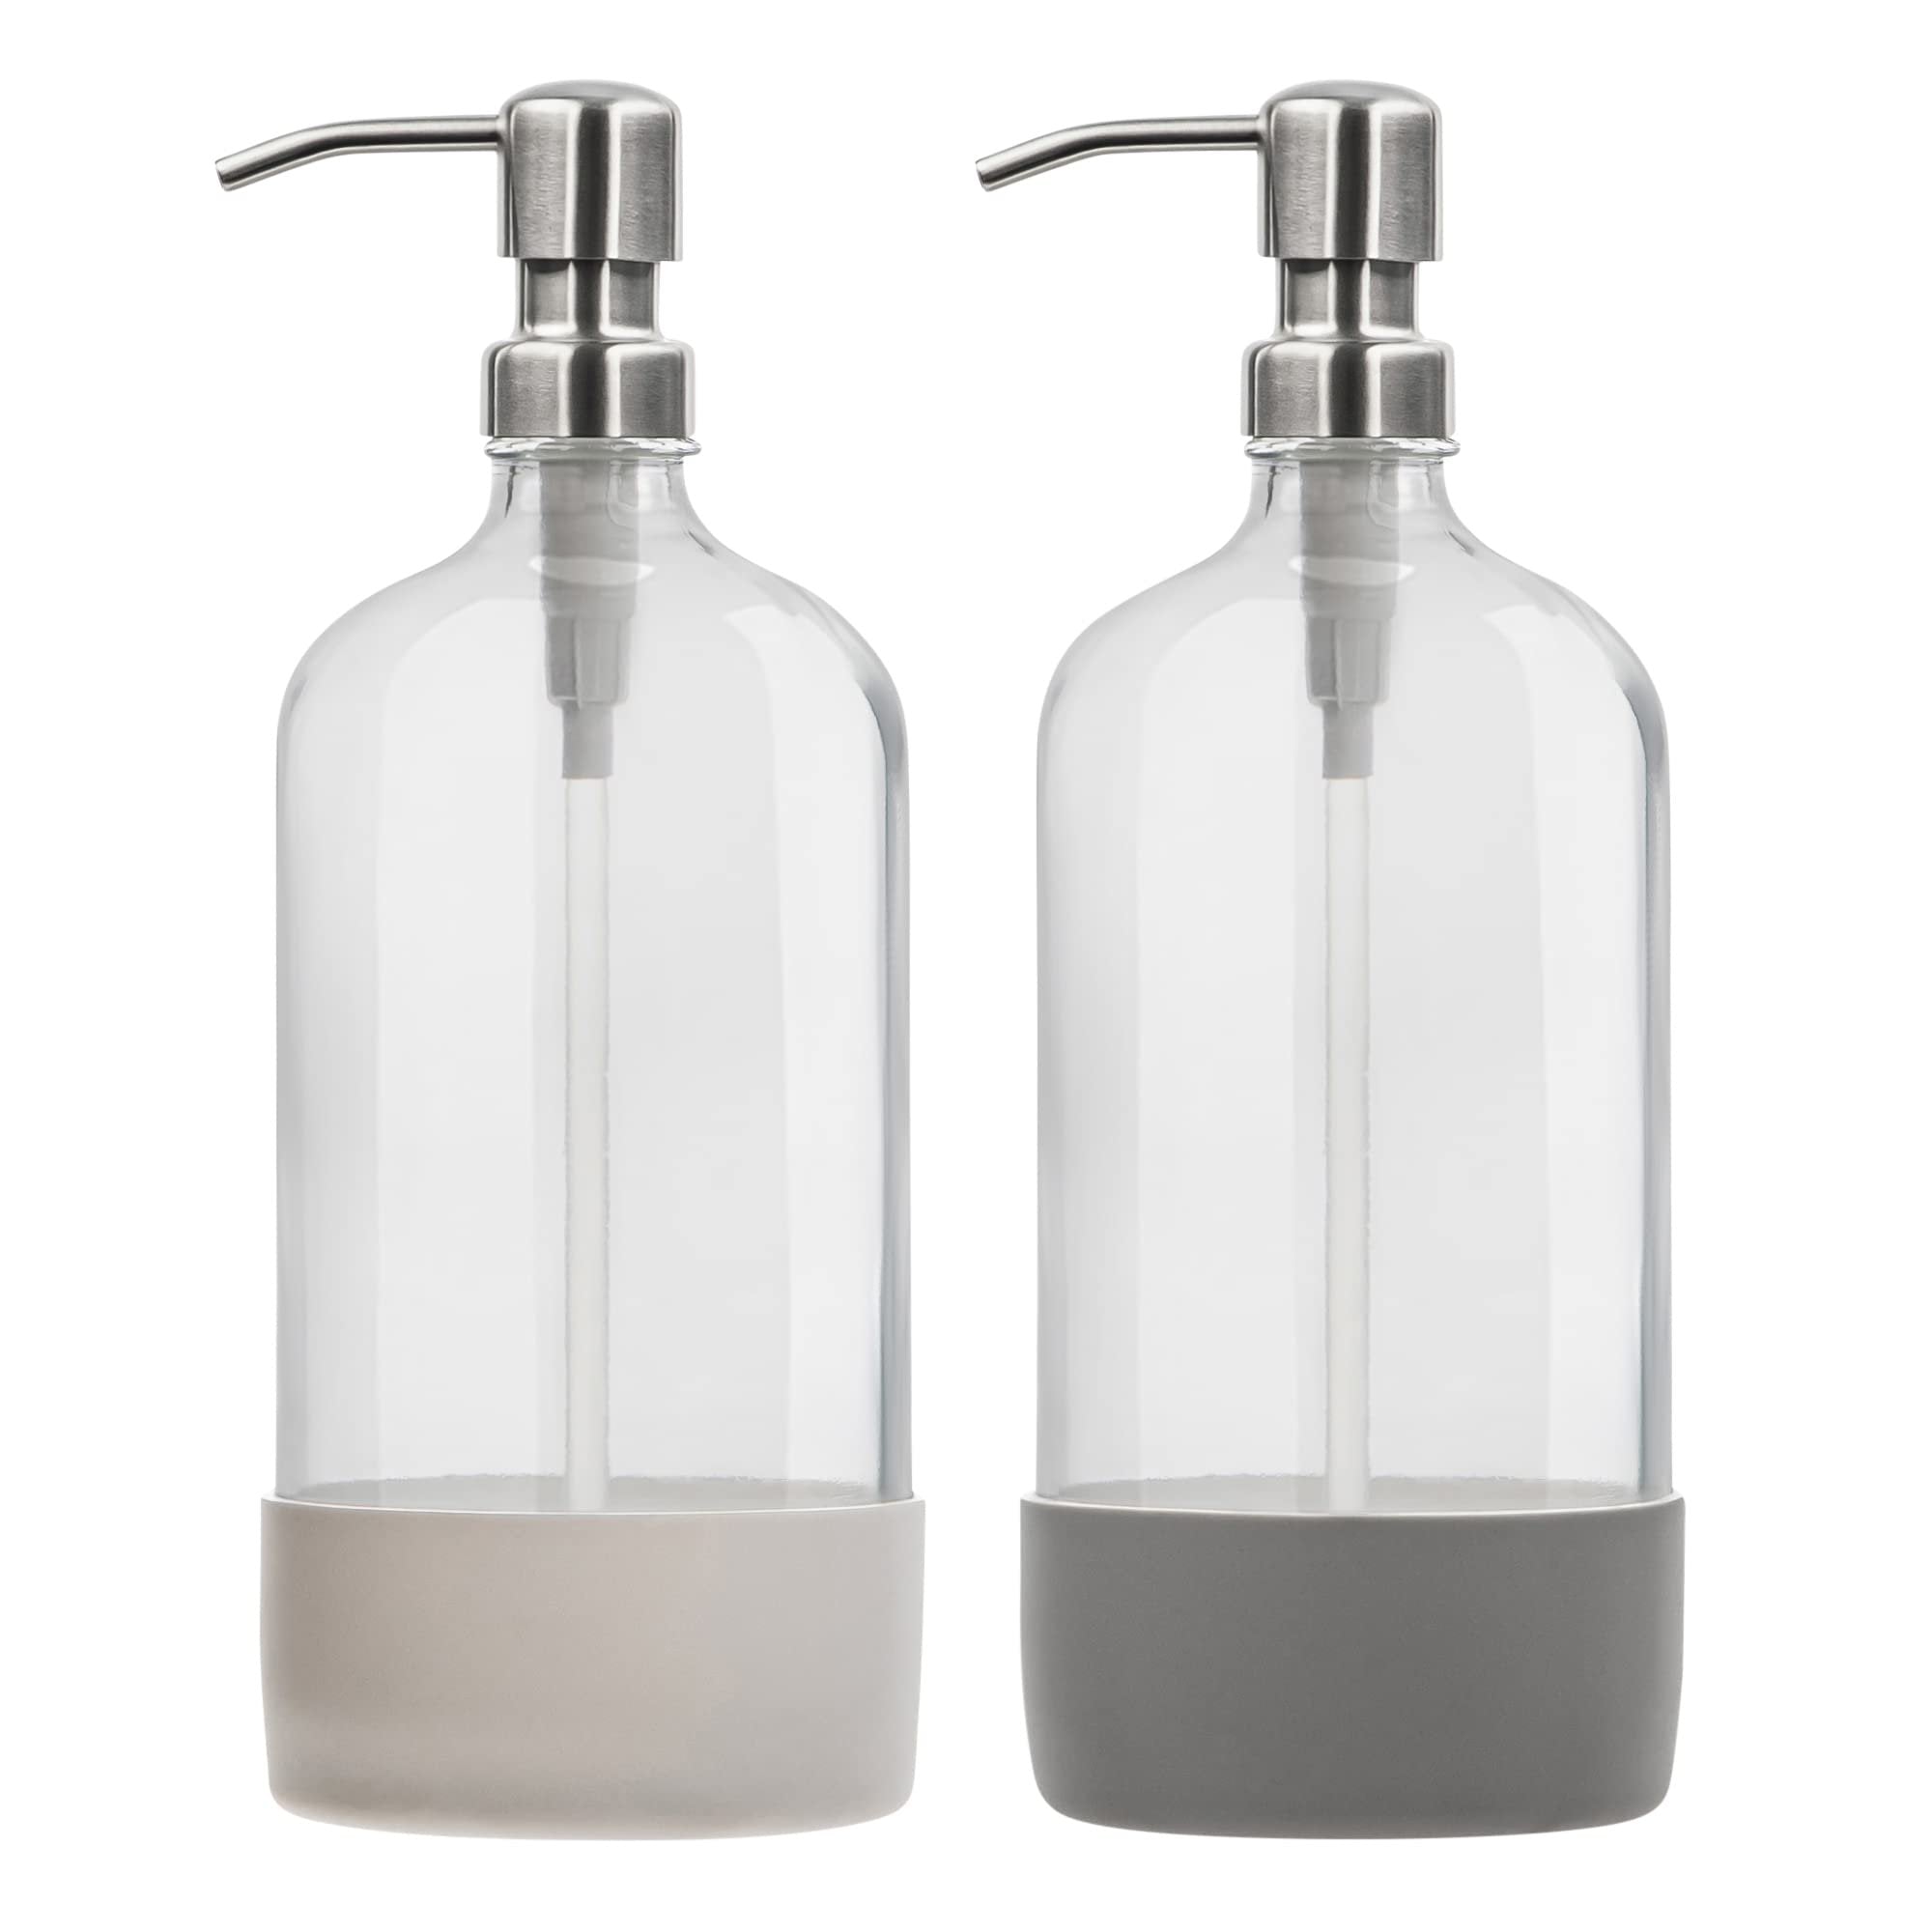 32 oz Glass Pump Bottle Rustproof Stainless Steel Pump, Funnel, and Lids. Modern Farmhouse Vintage Jar, Large Glass Shampoo Bottles with Pump and Laundry Soap Dispenser - Silver